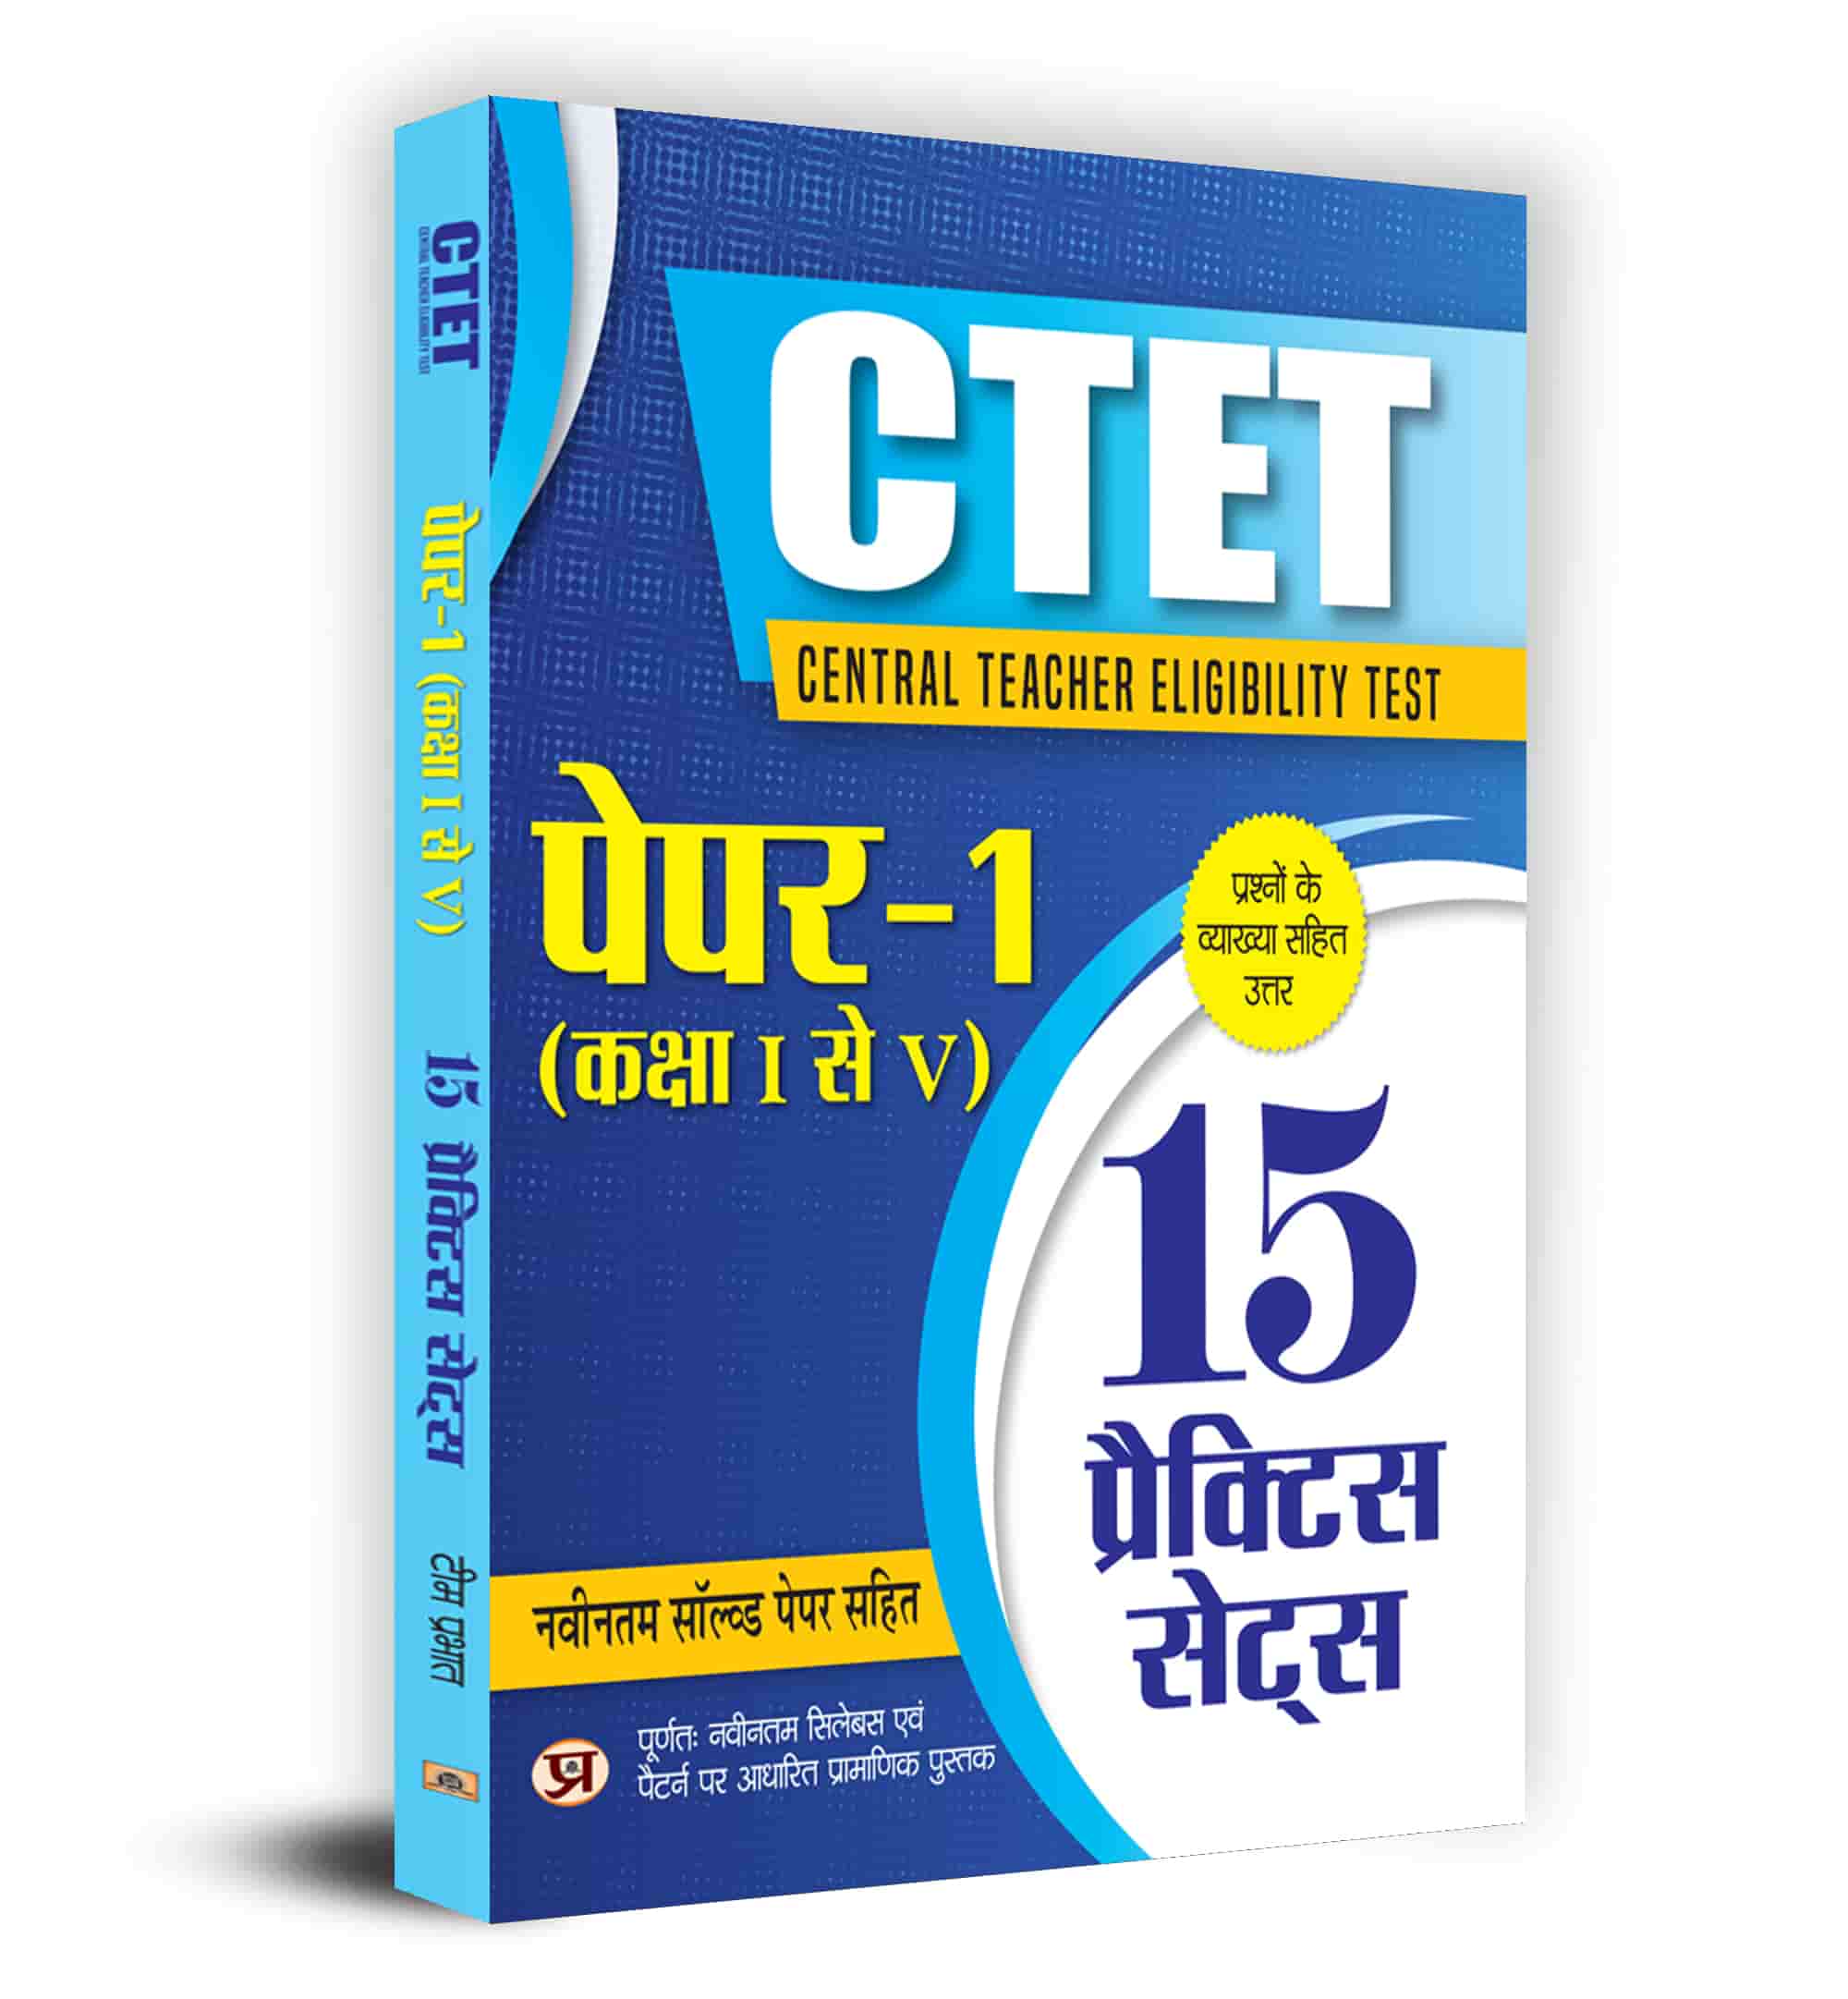 CTET Central Teacher Eligibility Test Paper -1 (Class I-V) 15 Practice Sets & Latest Solved Papers (Hindi)